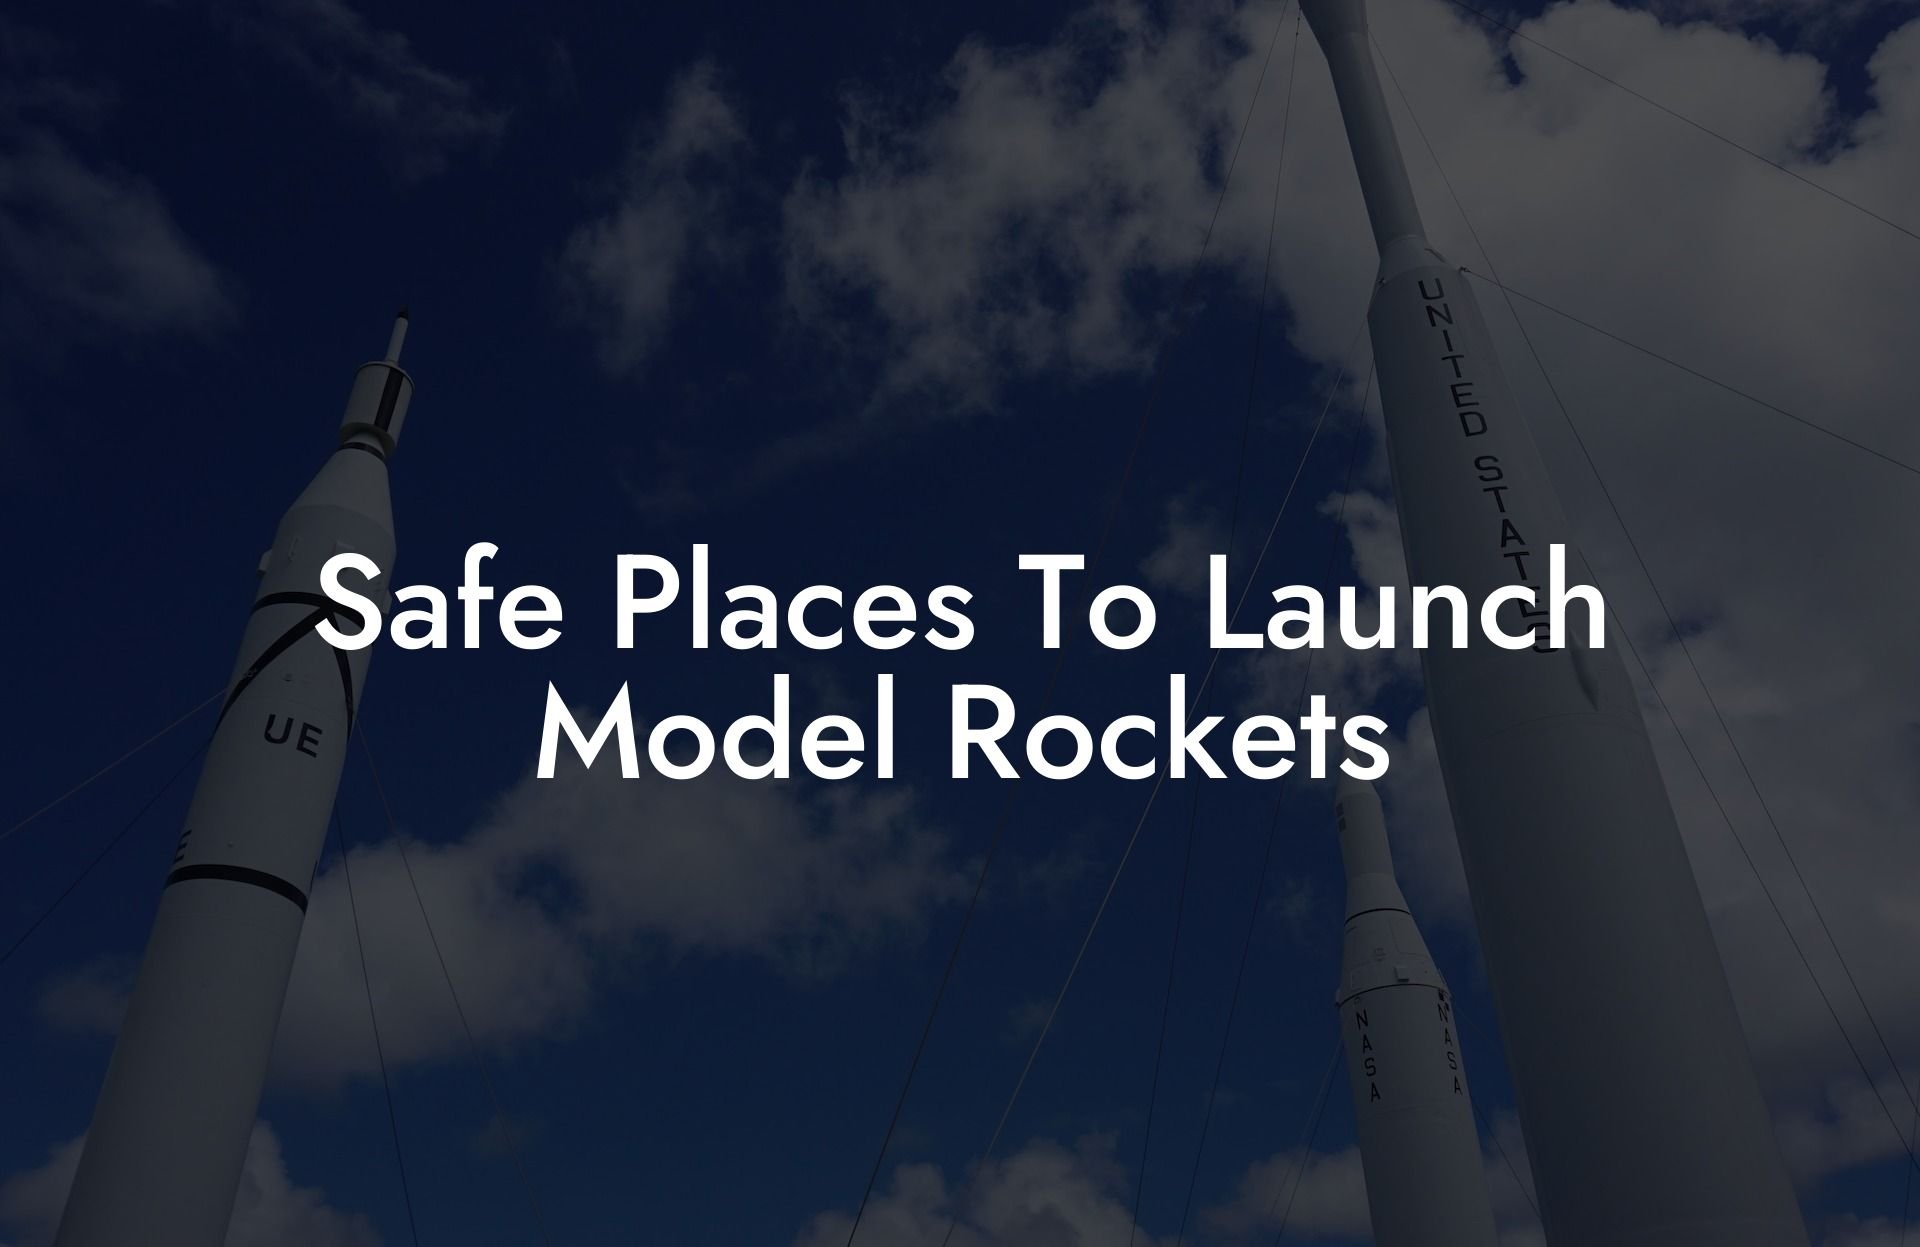 Safe Places To Launch Model Rockets